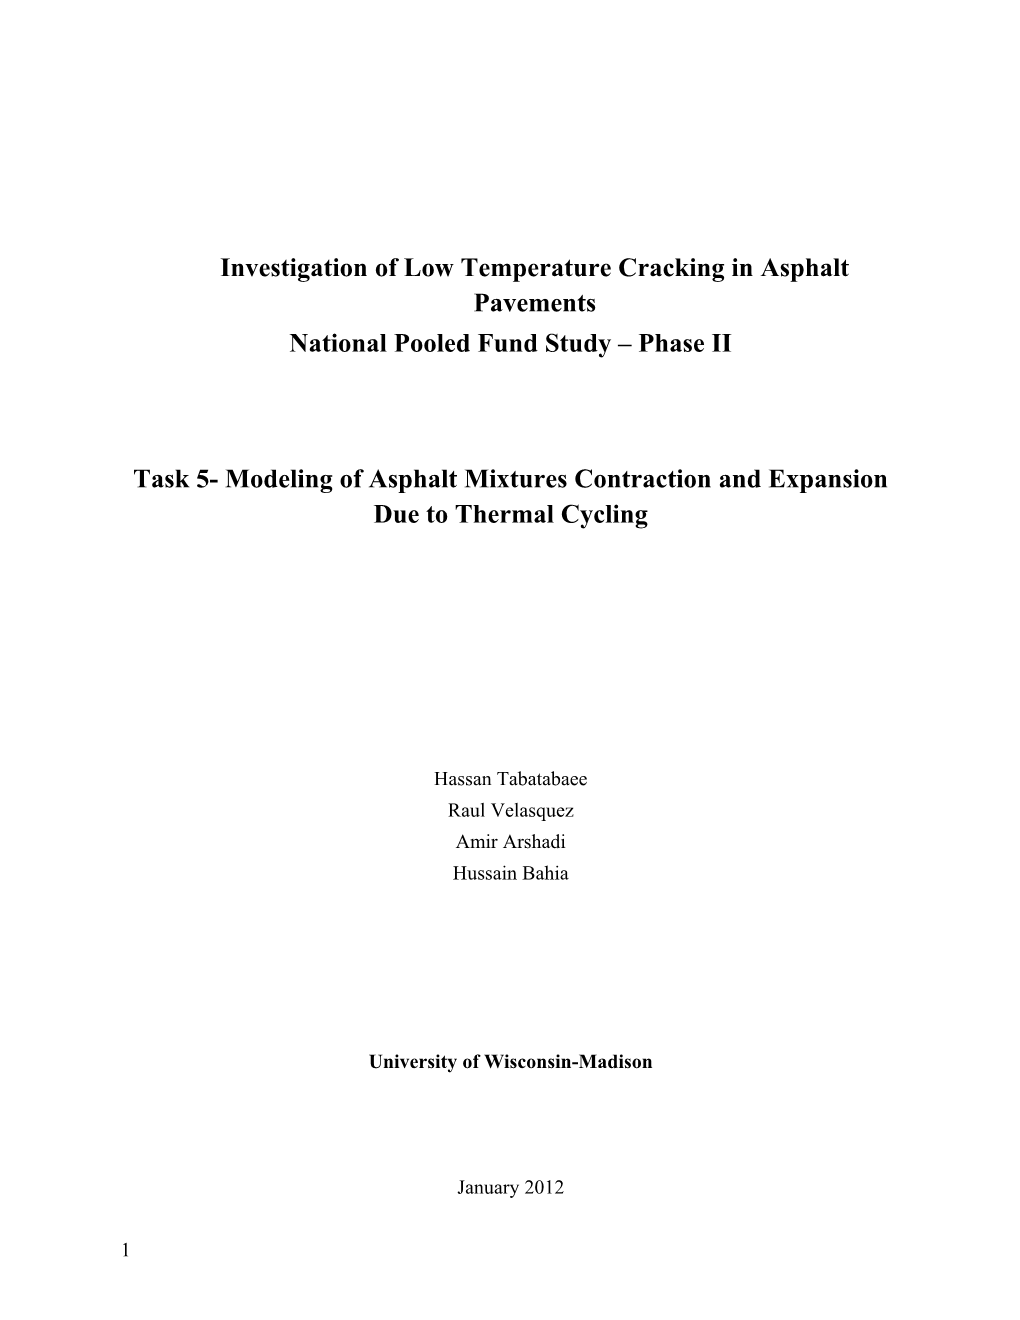 Investigation of Low Temperature Cracking in Asphalt Pavements